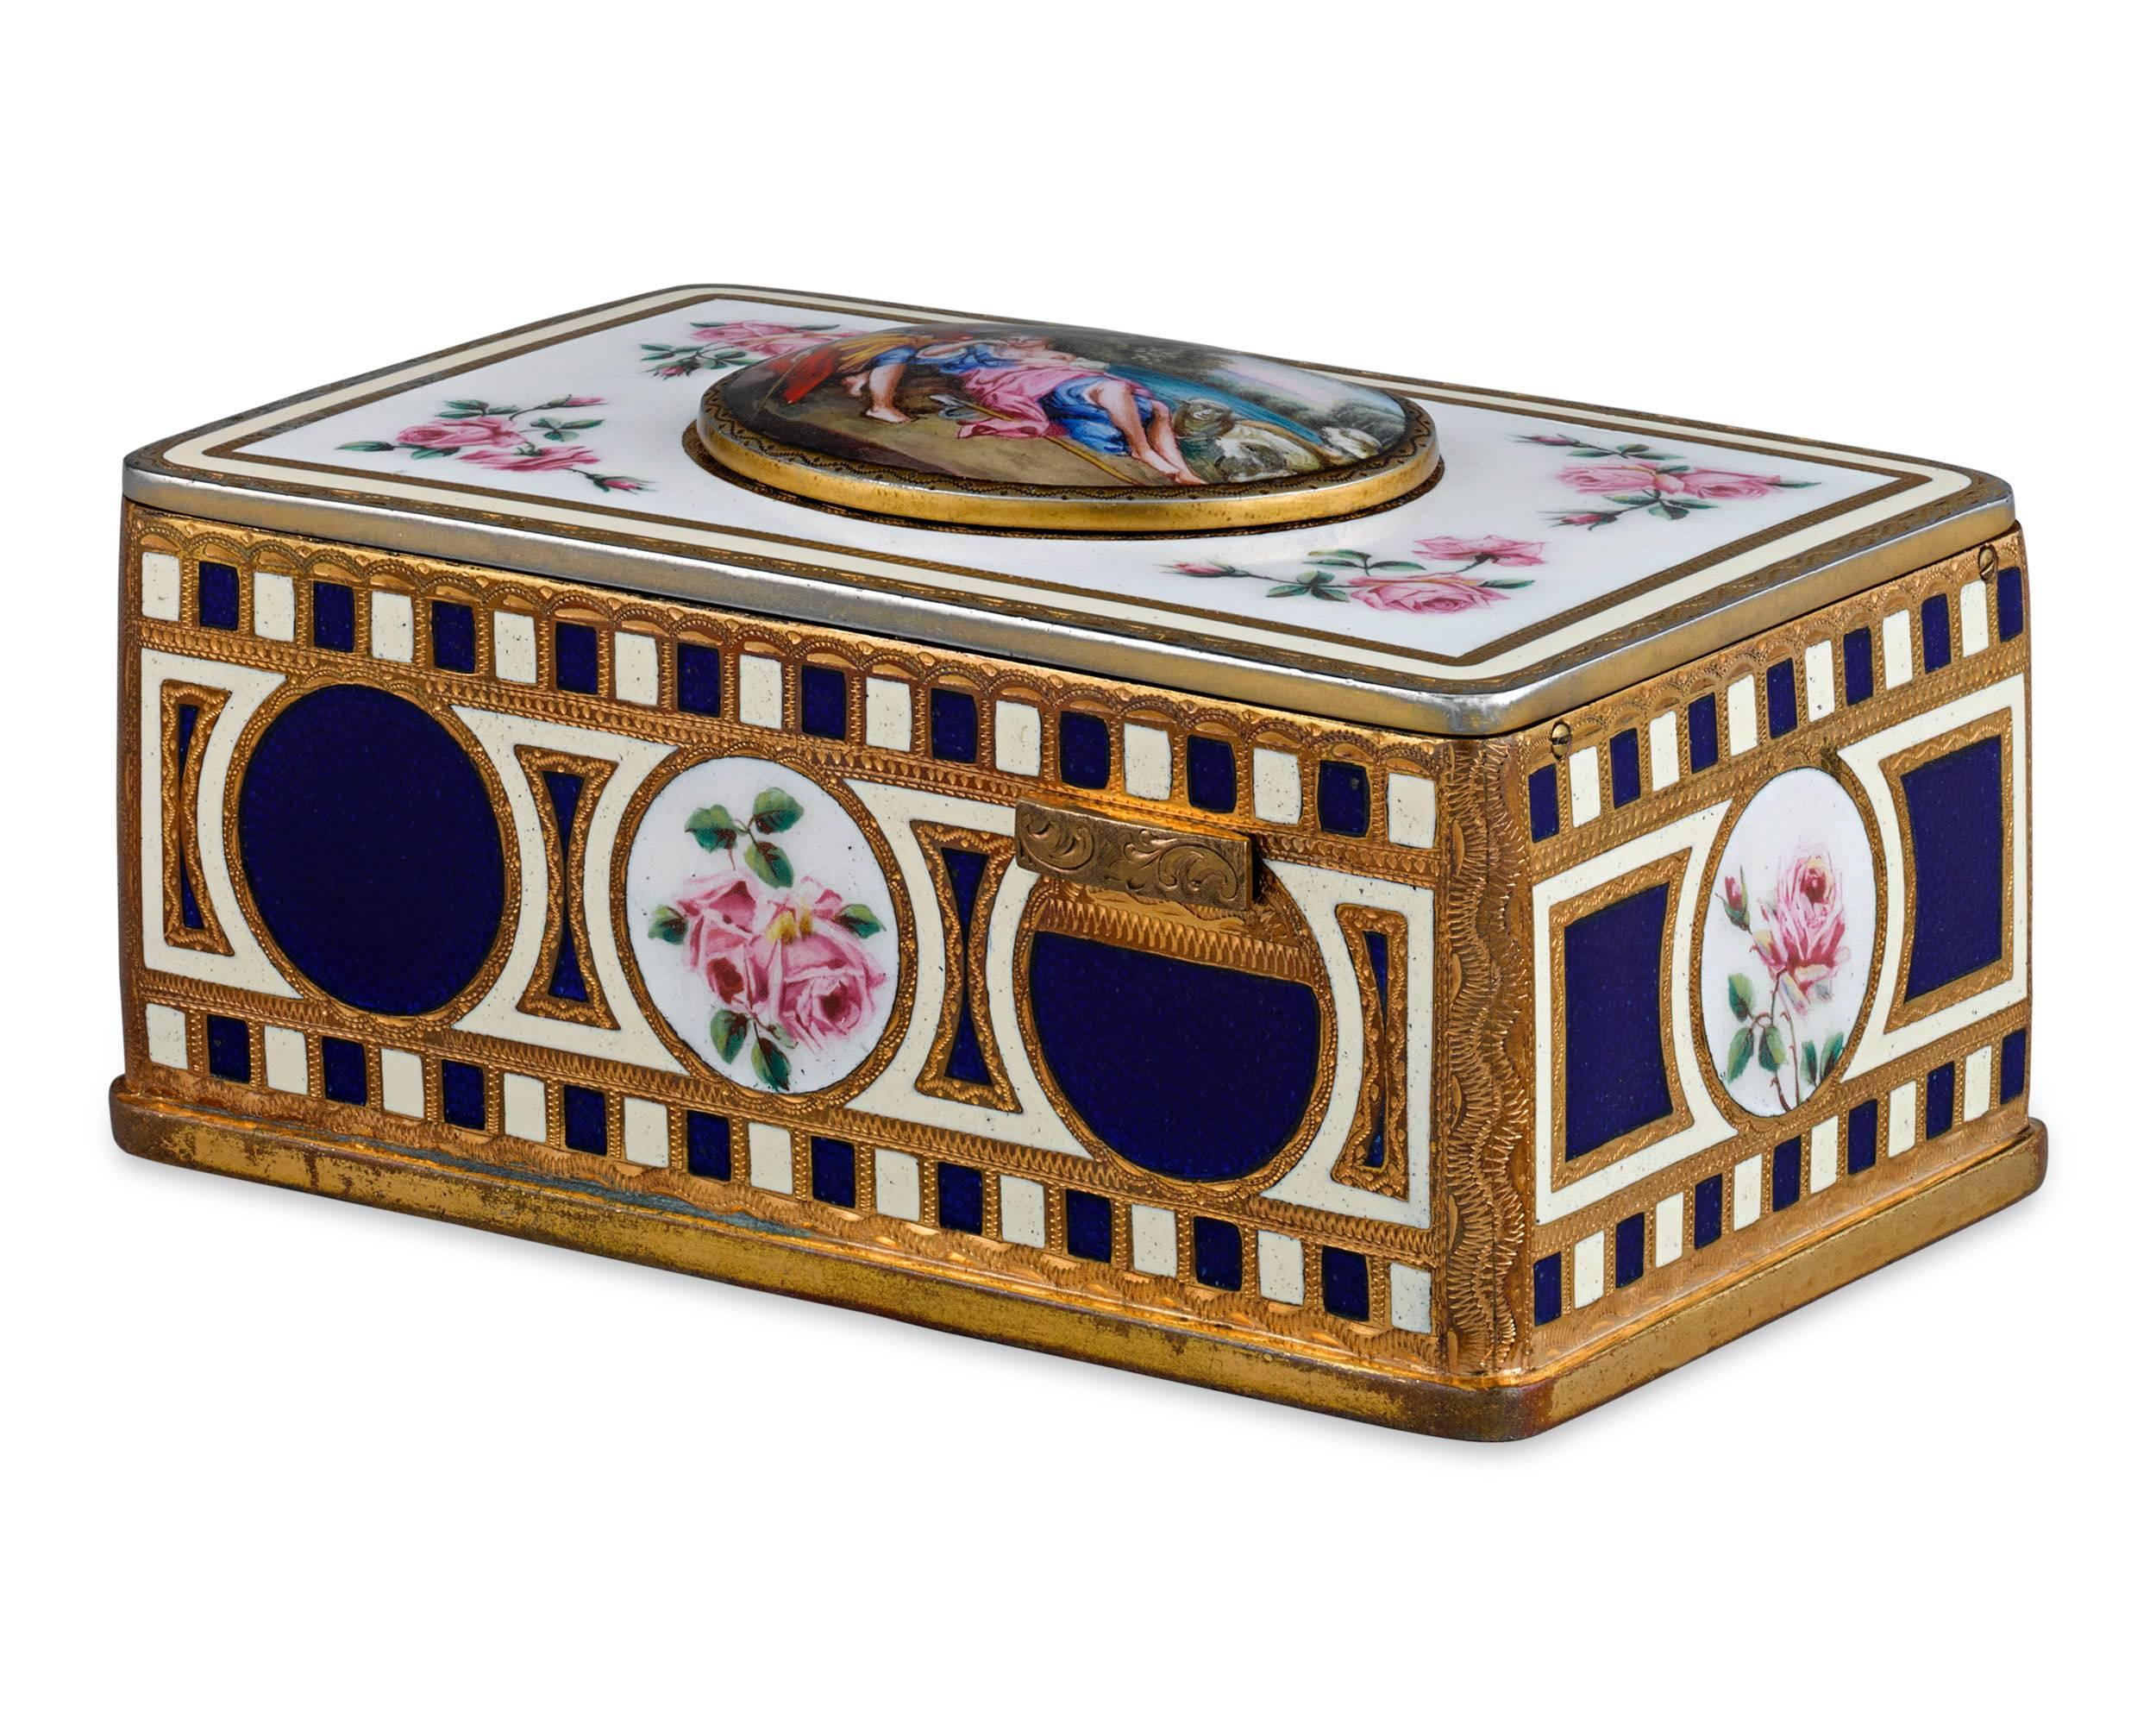 This enchanting German bird box is a work of mechanical wonder, featuring a movement crafted by the renowned Karl Griesbaum. Hand-painted enamel adorns the entire case by Emil Brenk, with delicate rose blooms surrounding a classically-inspired scene